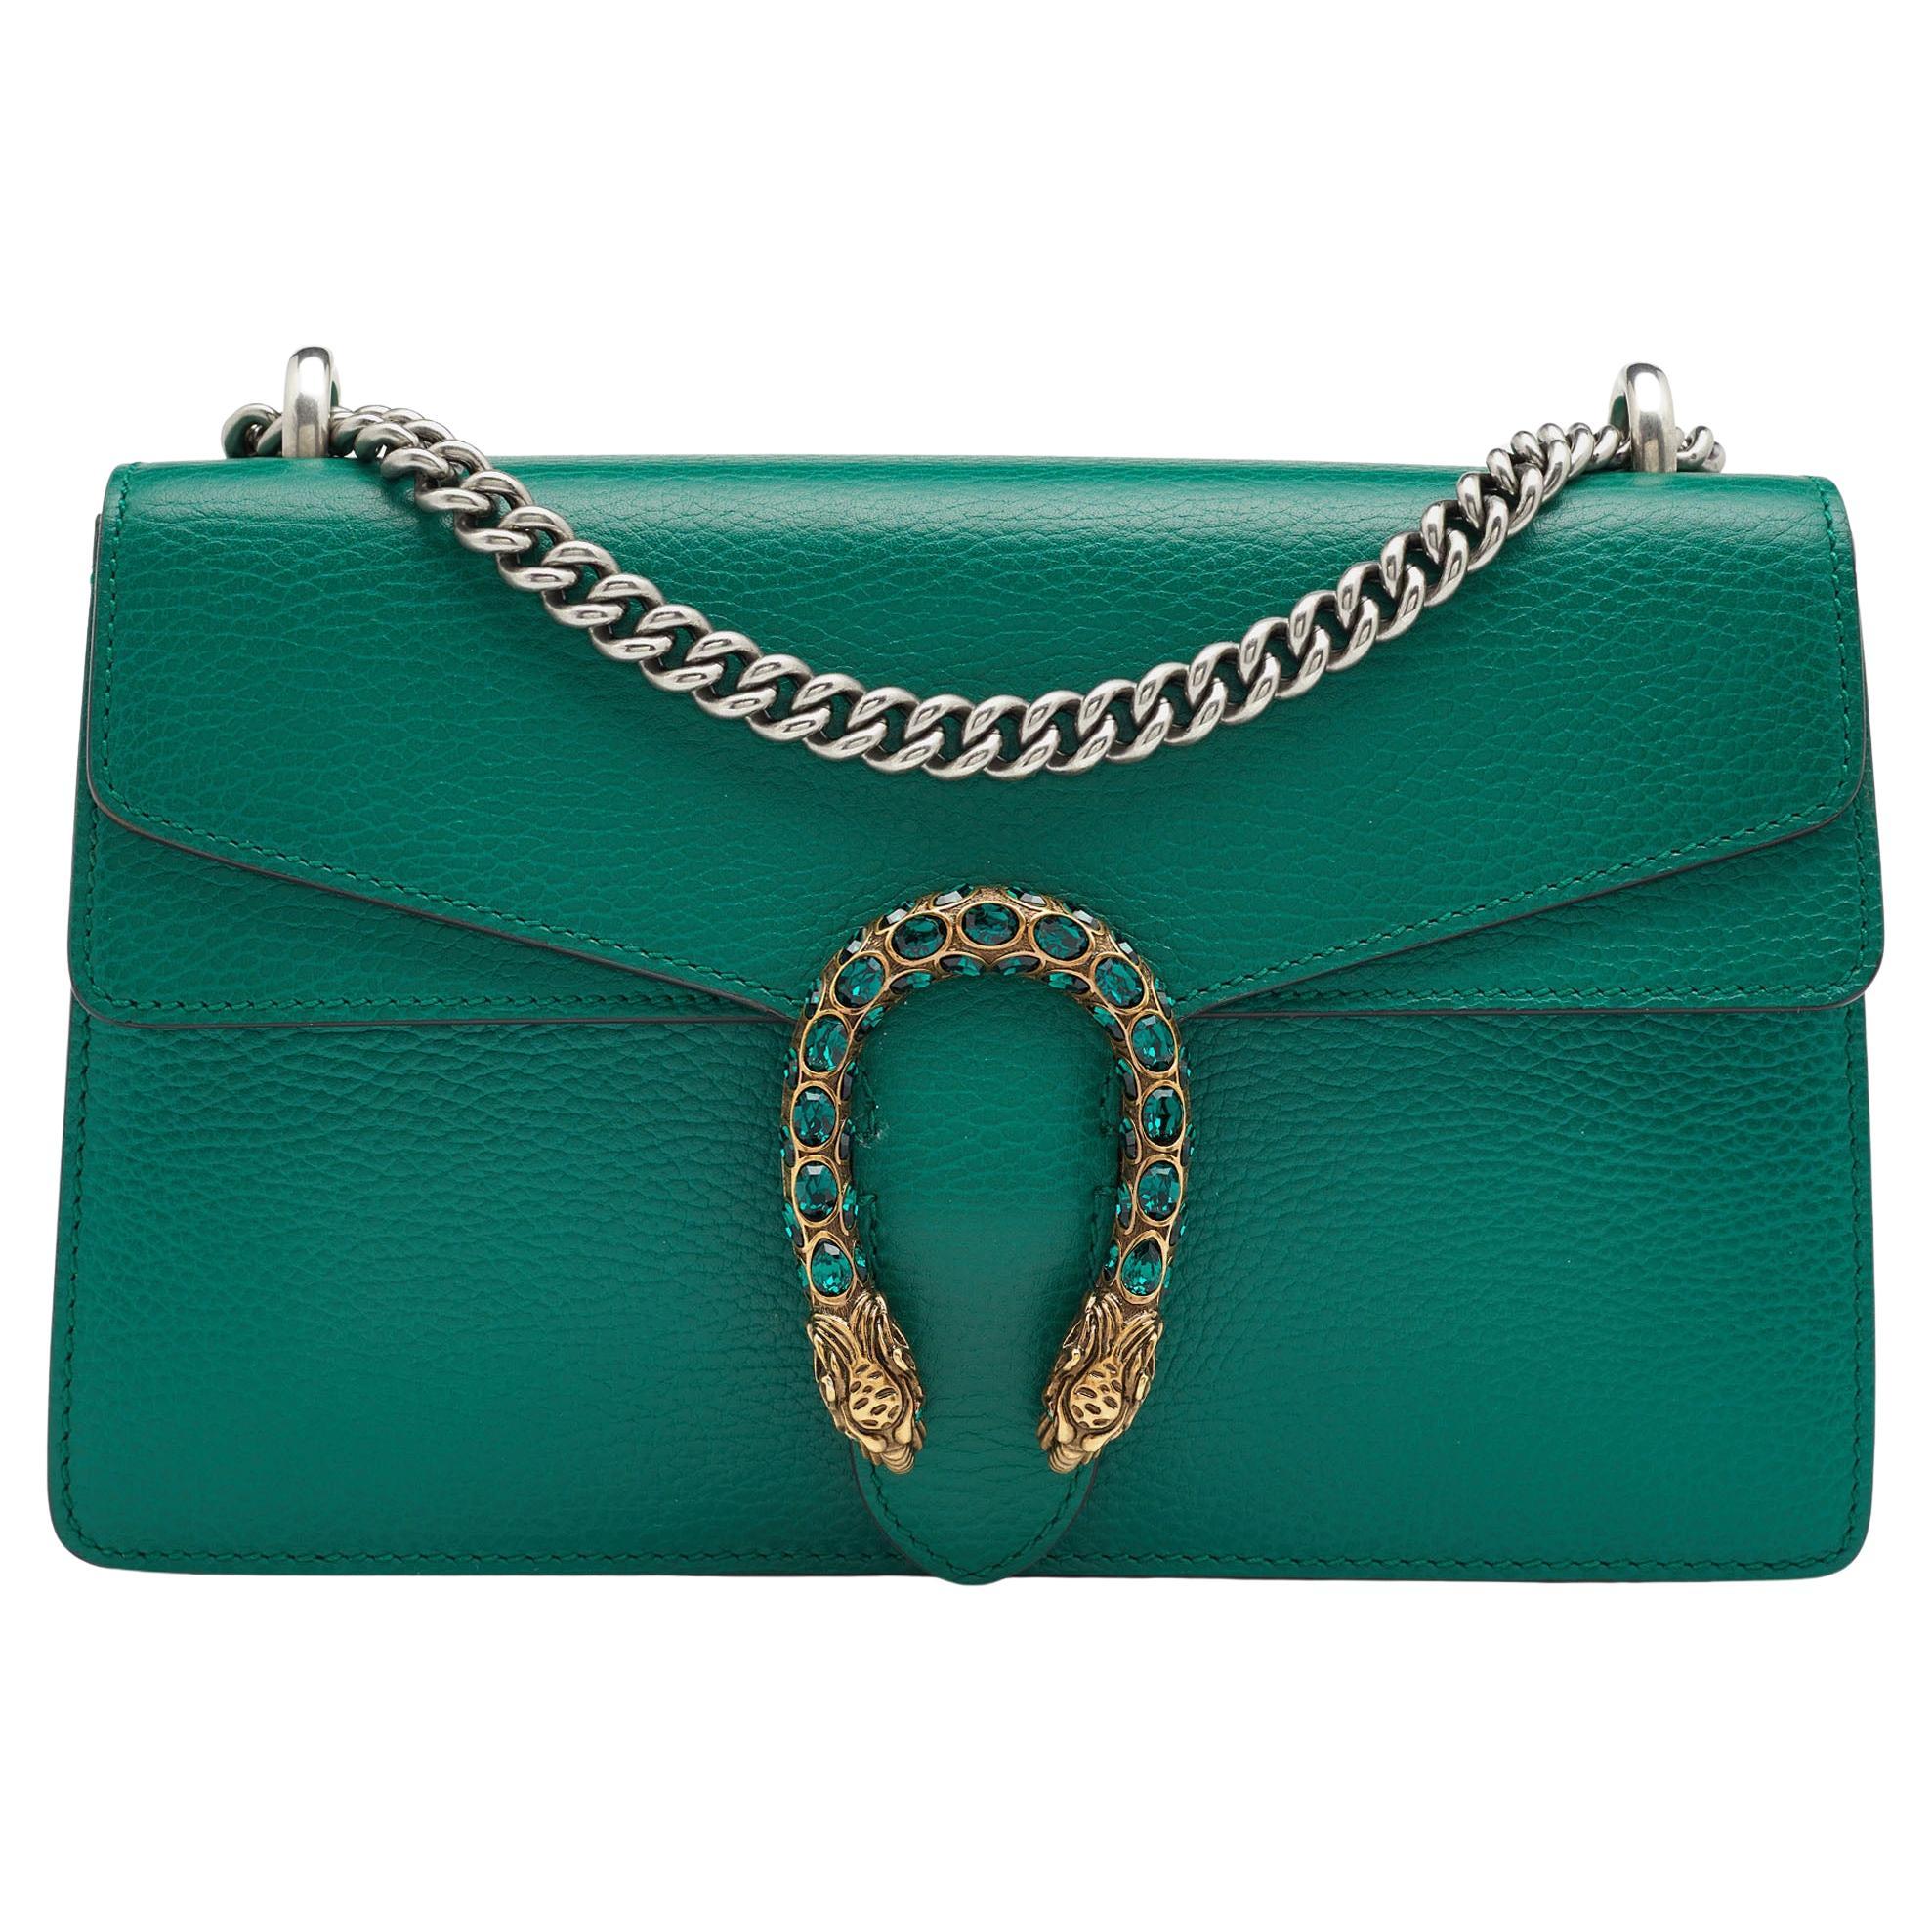 Gucci Green Leather Small Dionysus Shoulder Bag